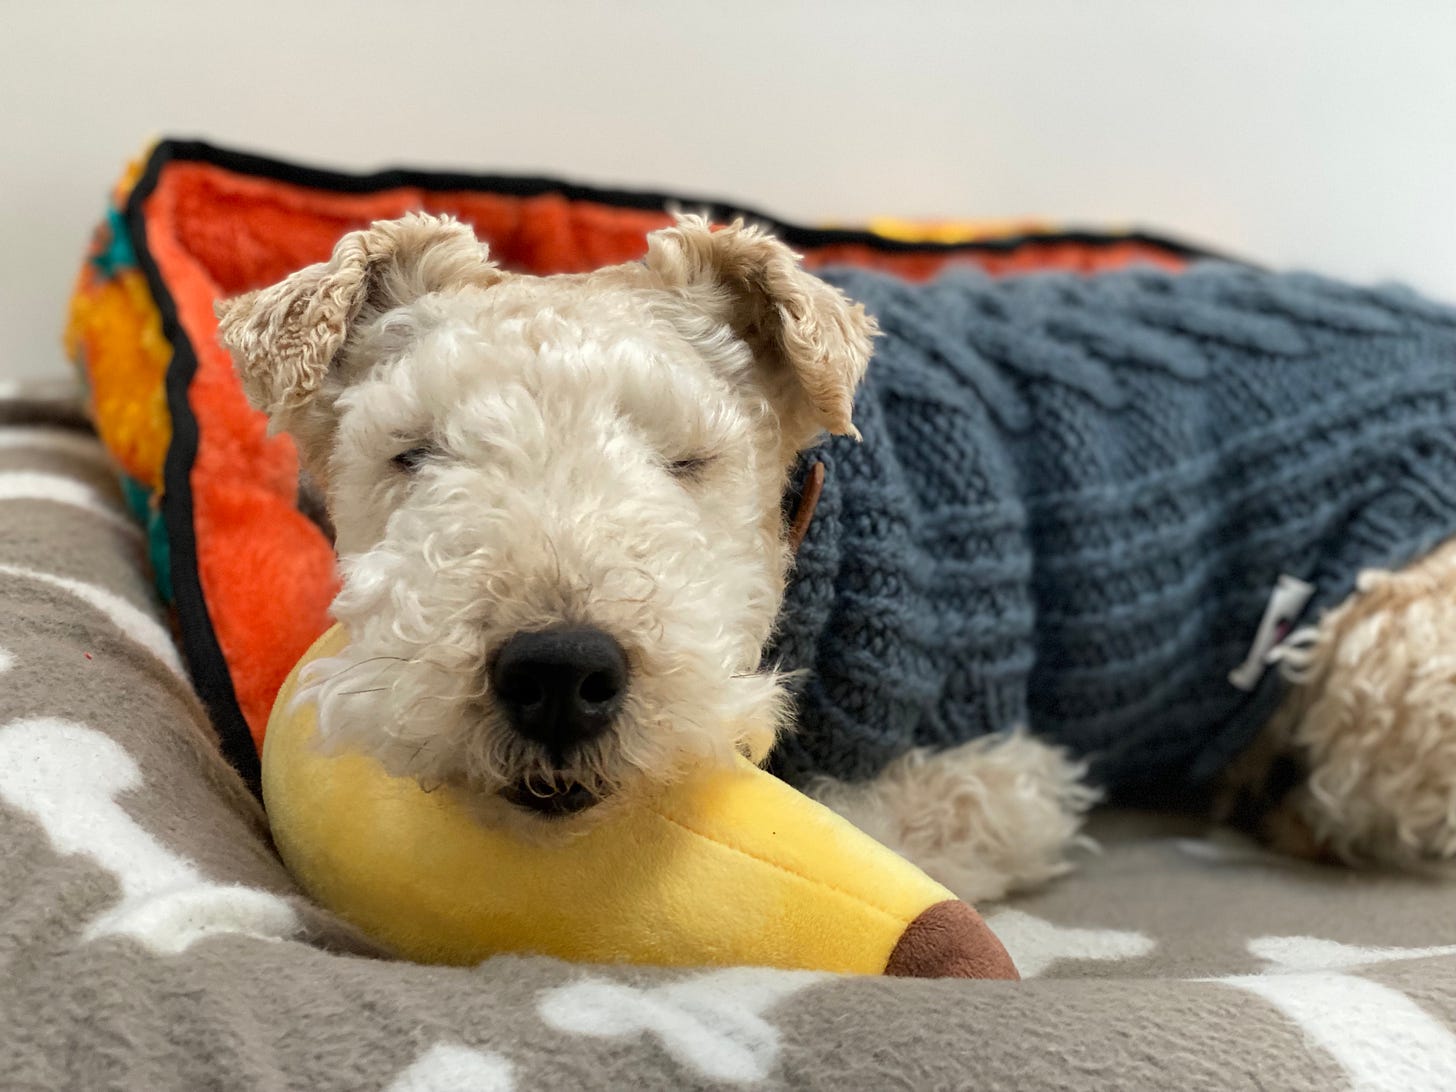 Nutmeg the lakeland terrier lying on her bed. She is wearing a grey woollen jumper. Behind her is an orange snake toy. Her head is resting on a large, soft banana toy, and her eyes are closed. It’s a happy and peaceful photo.